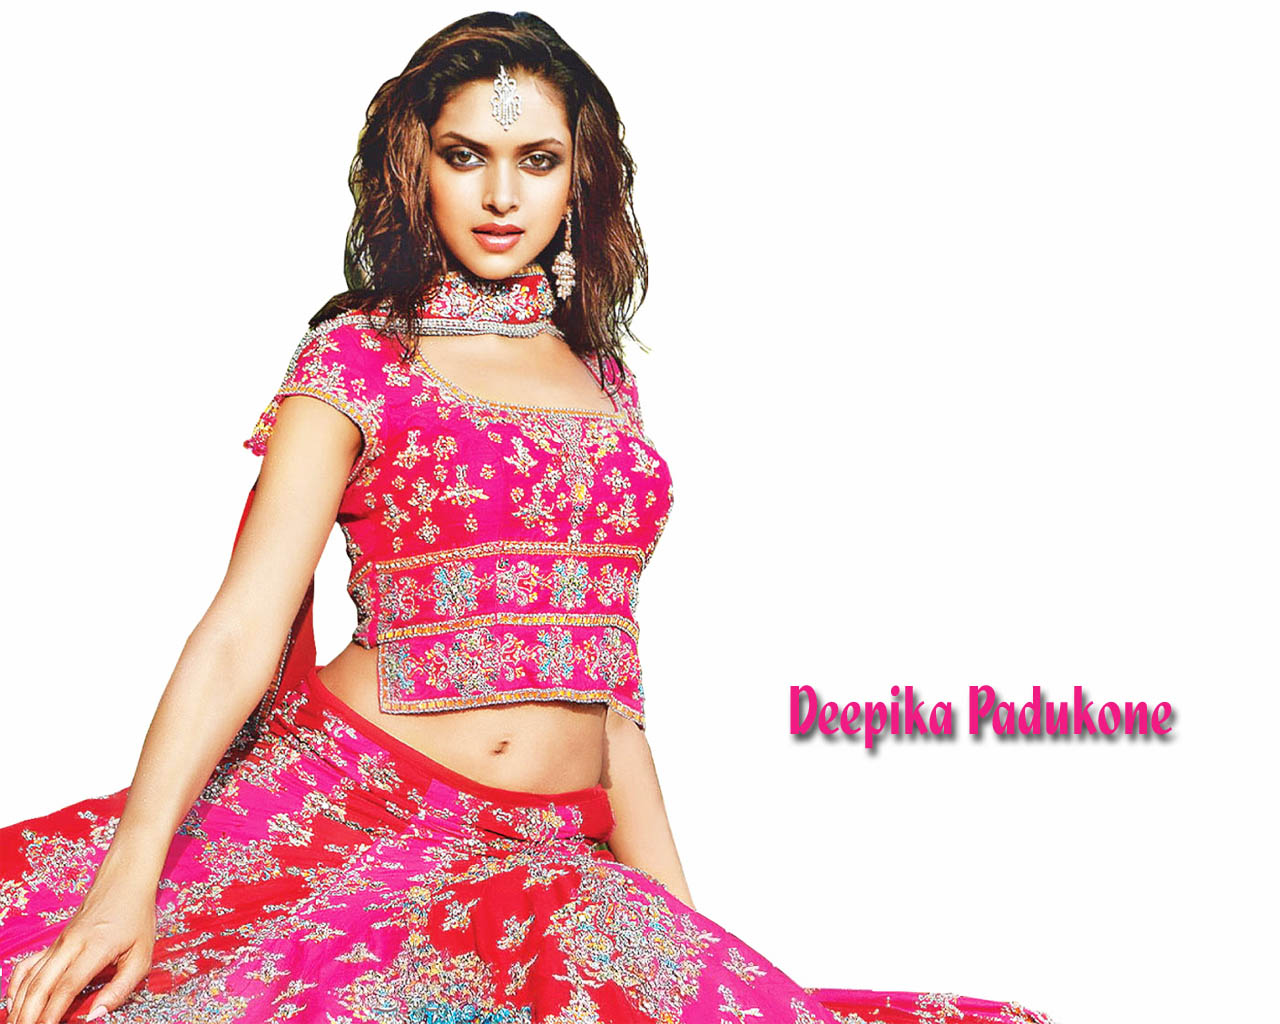 Deepika Padukone Wallpapers Pictures Gallery Bollywood